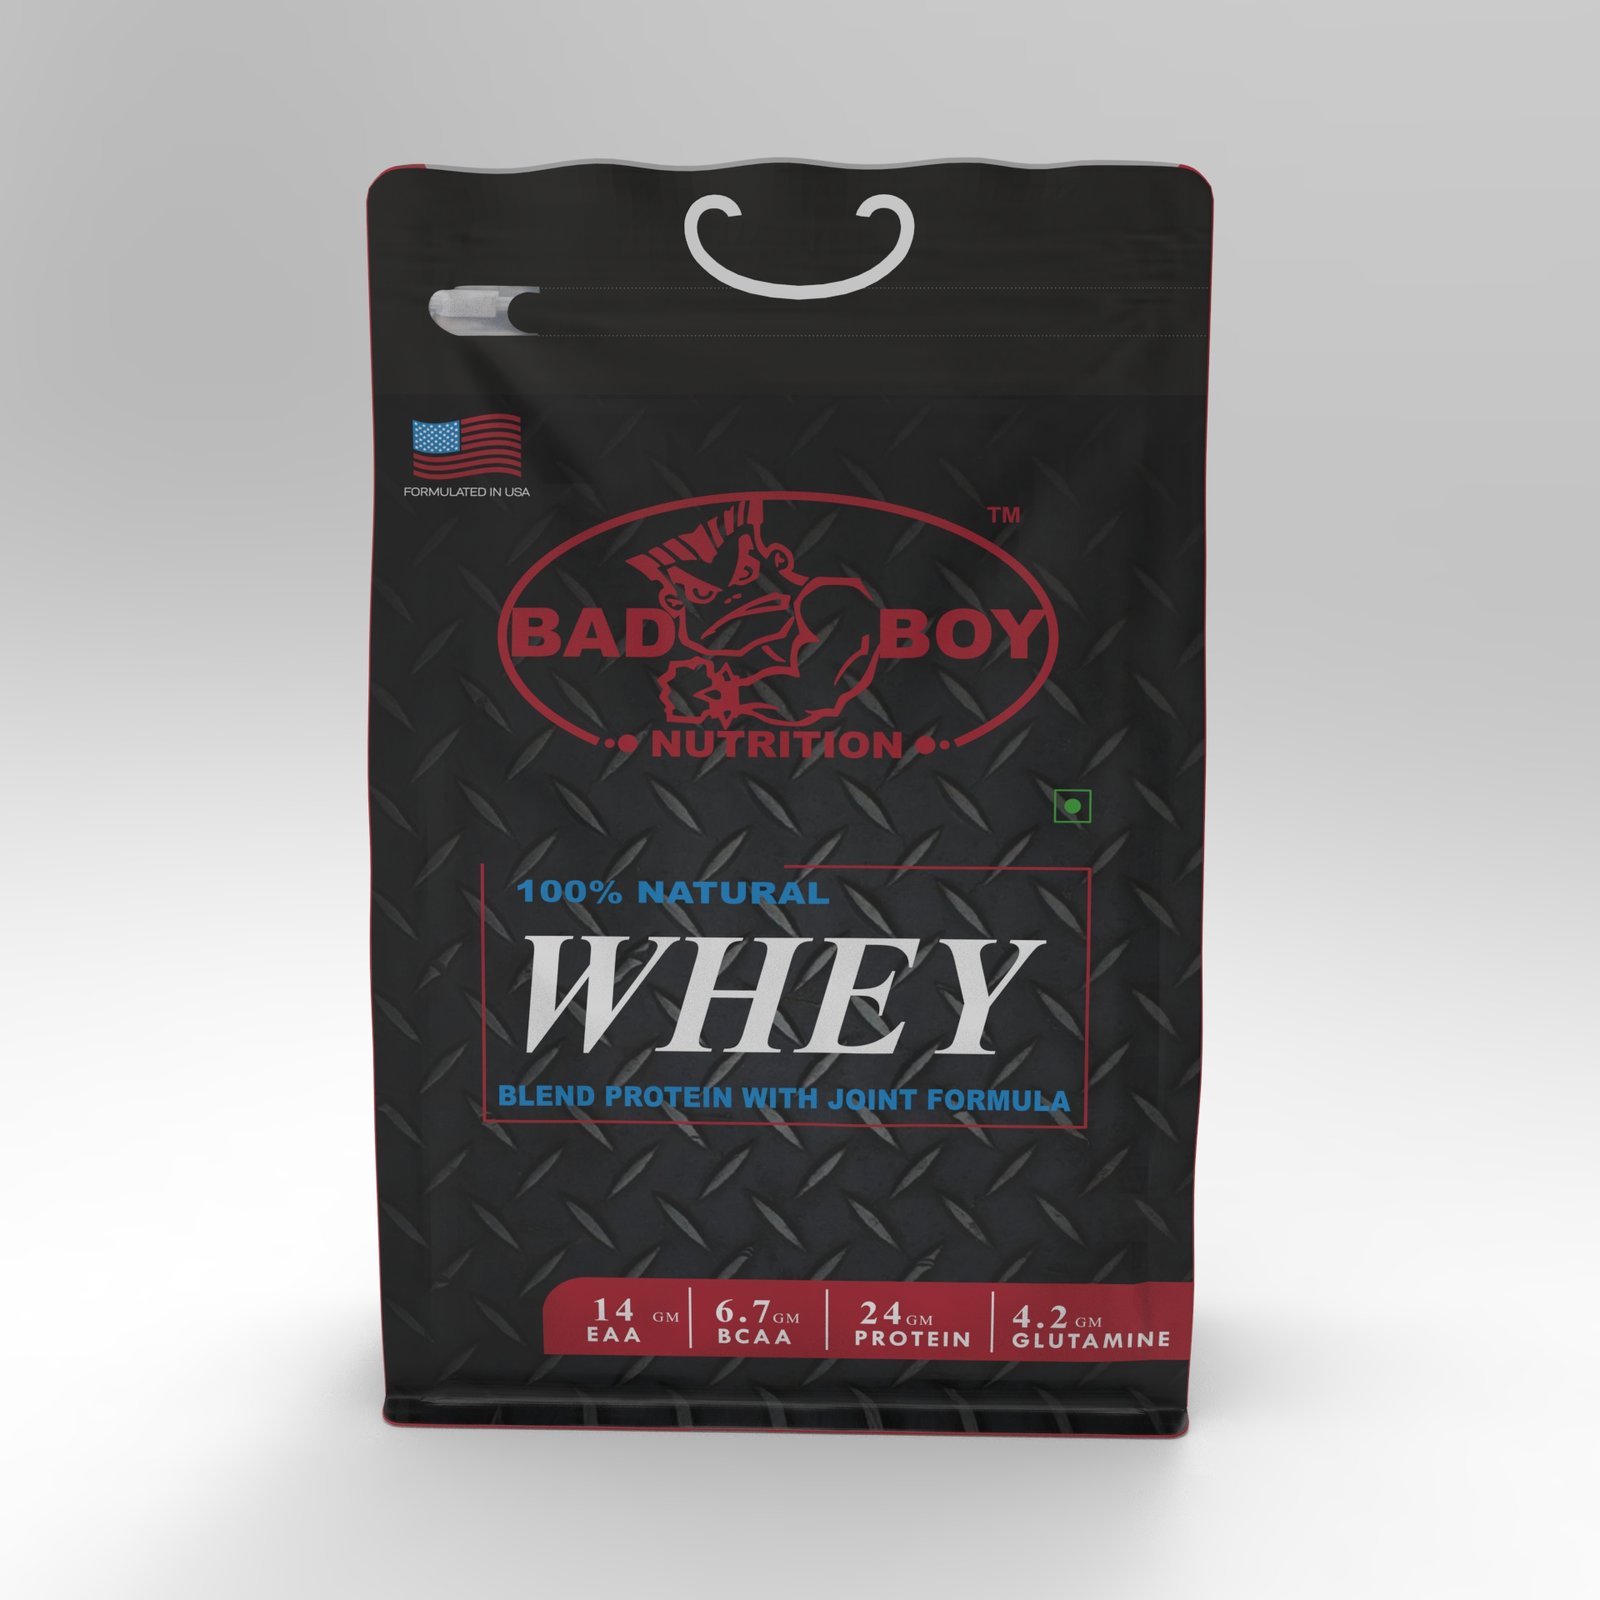 Bad Boy Nutrition 100% Natural Whey | Blend Protein With Joint Formula